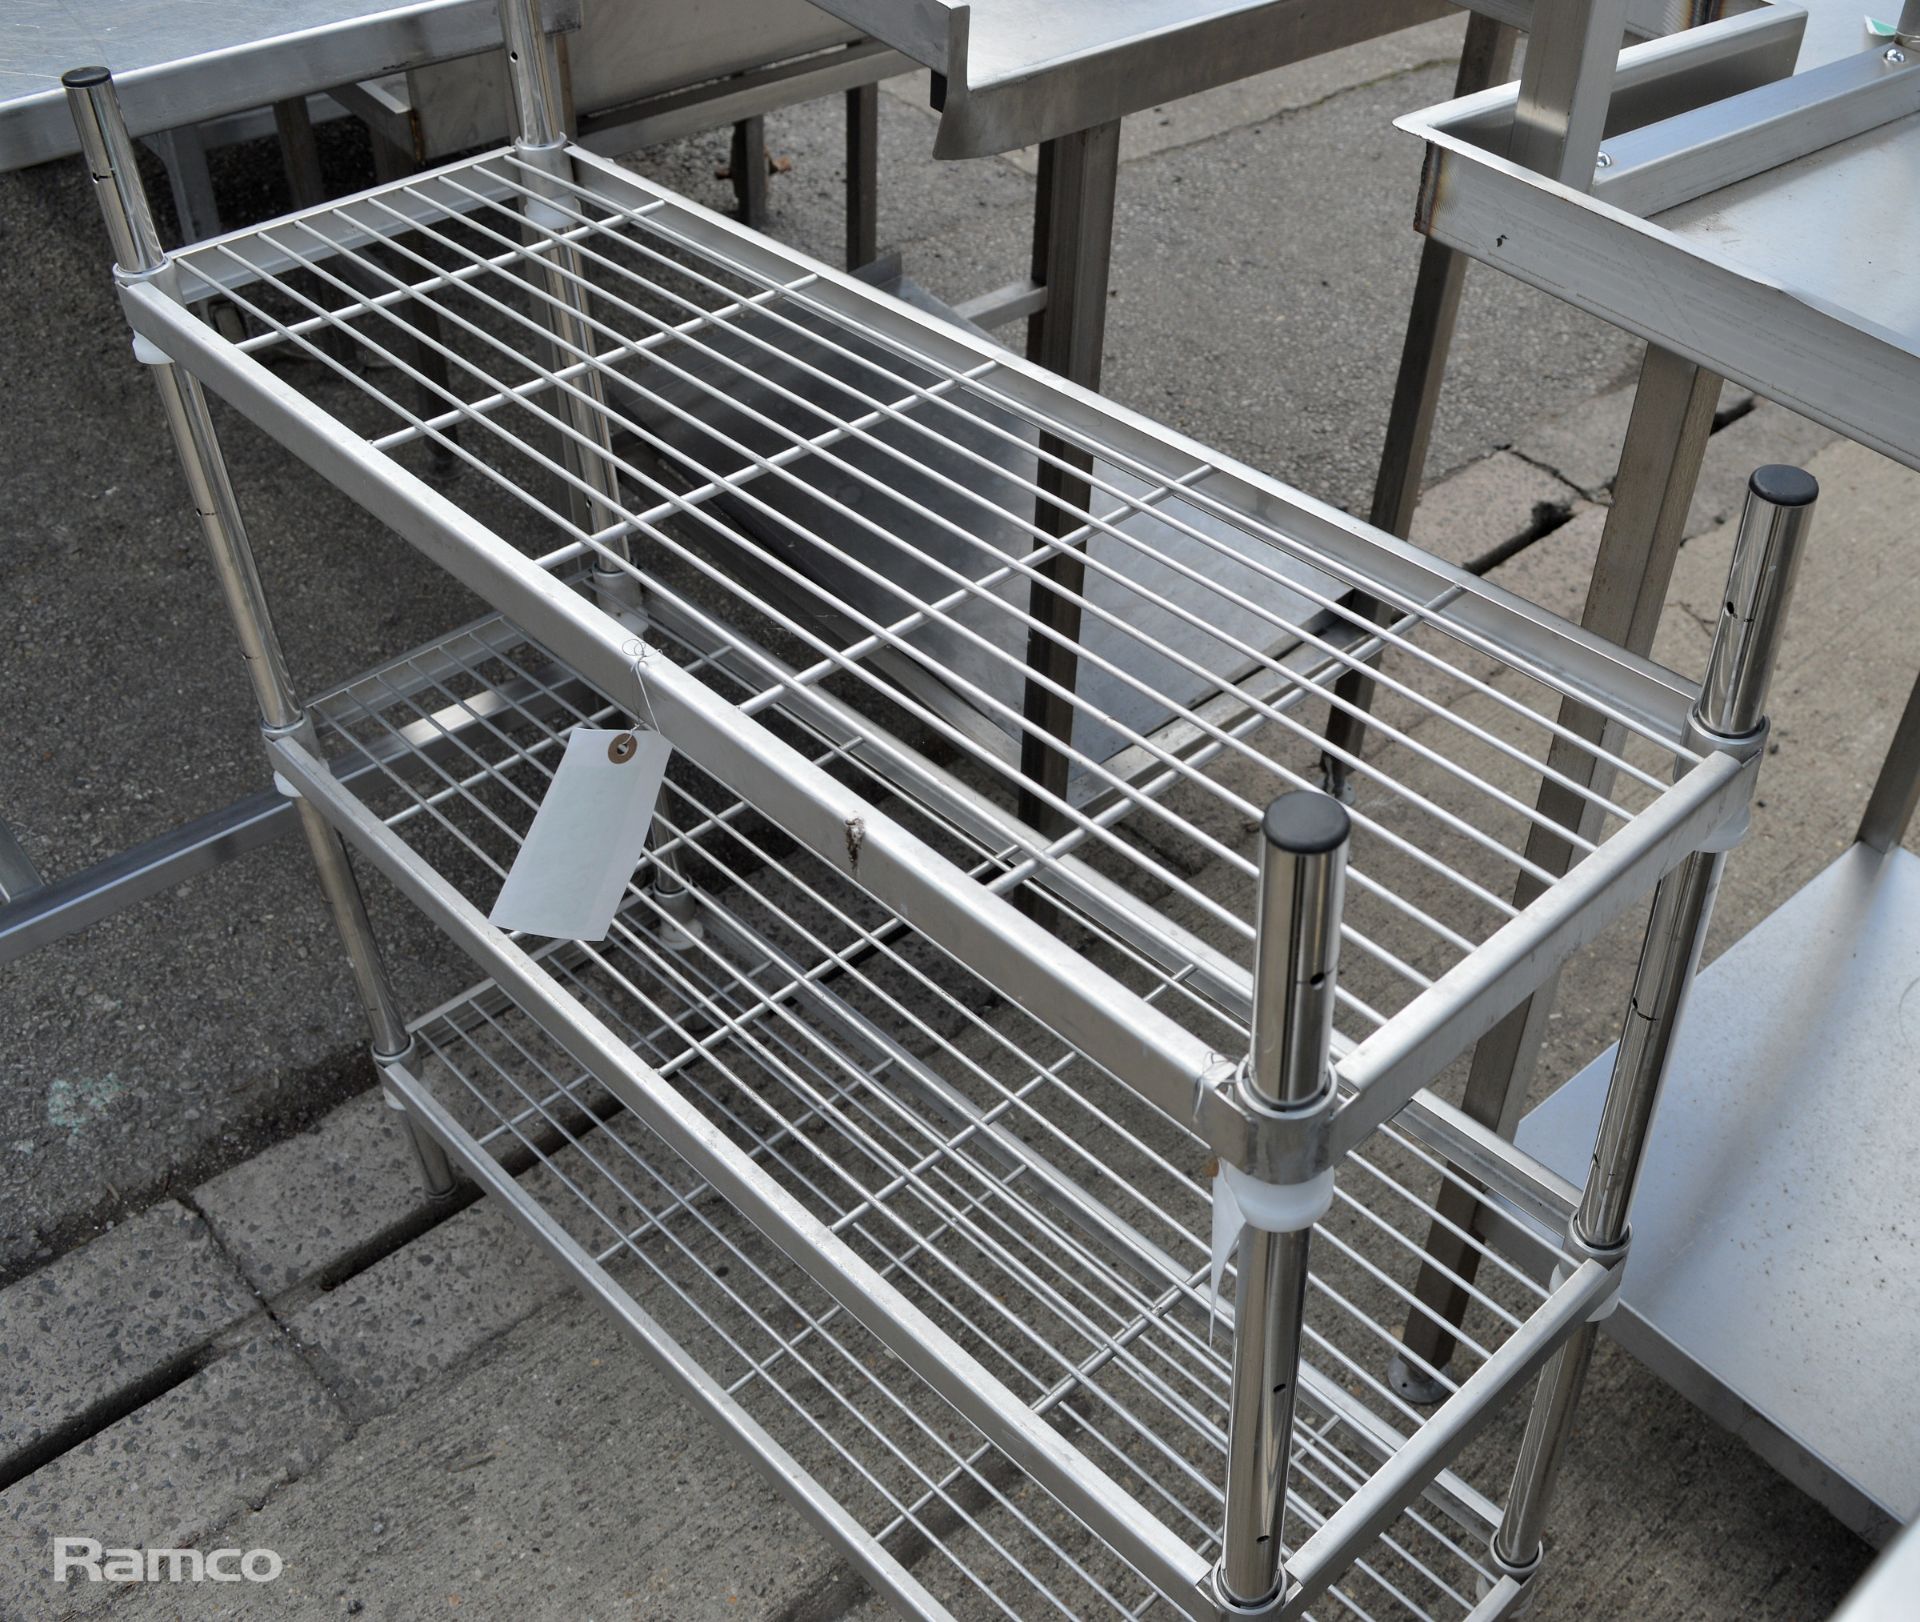 Stainless steel 3 tier wire racking L91 x W30 x H92cm - Image 3 of 3